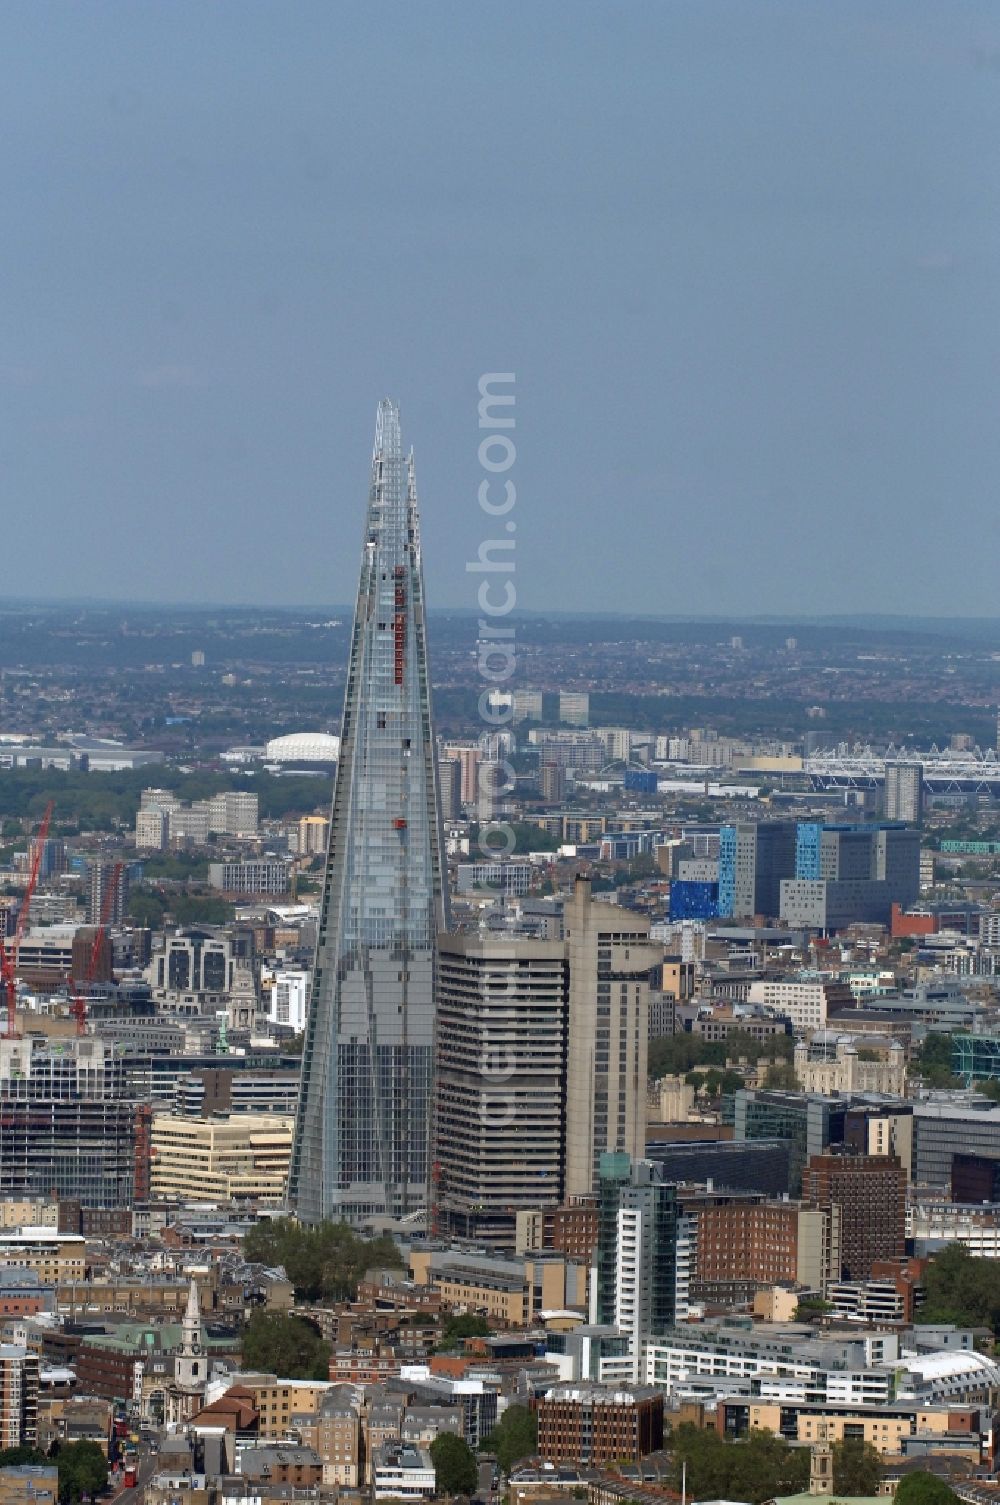 Aerial photograph London - View The Shard - Europe's tallest building. The high-rise occurs at the London Bridge Station. The Shard London Bridge (formerly known as London Bridge Tower, and Shard of Glass) is a skyscraper under construction in London, which will be on its completion as it stood at 310 meters, the second tallest building in Europe